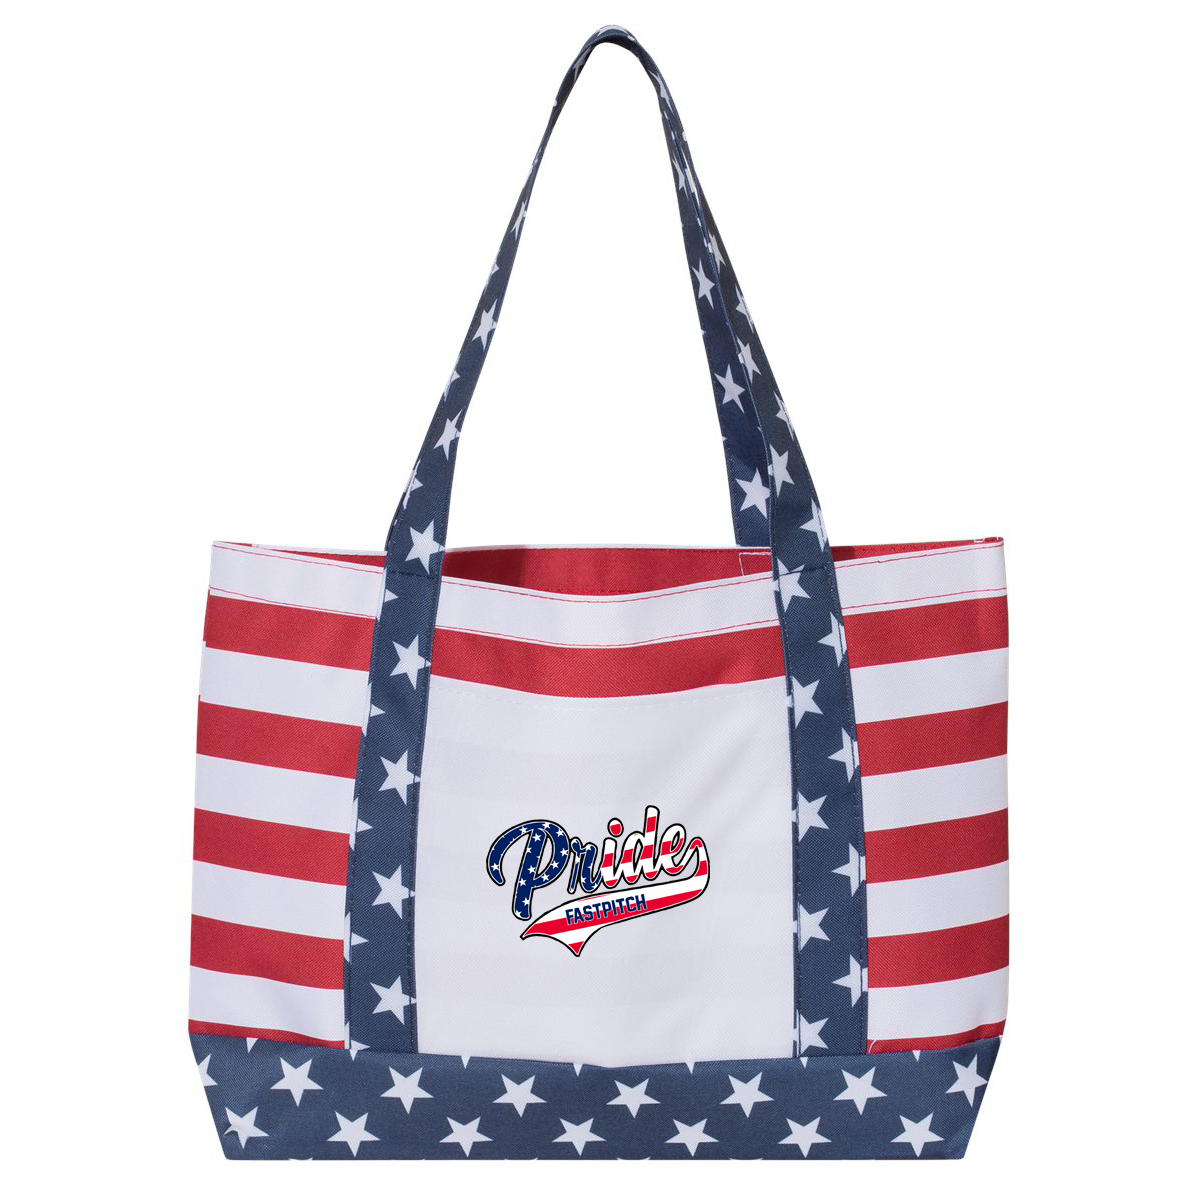 Long Island Pride Fastpitch American Boater Tote